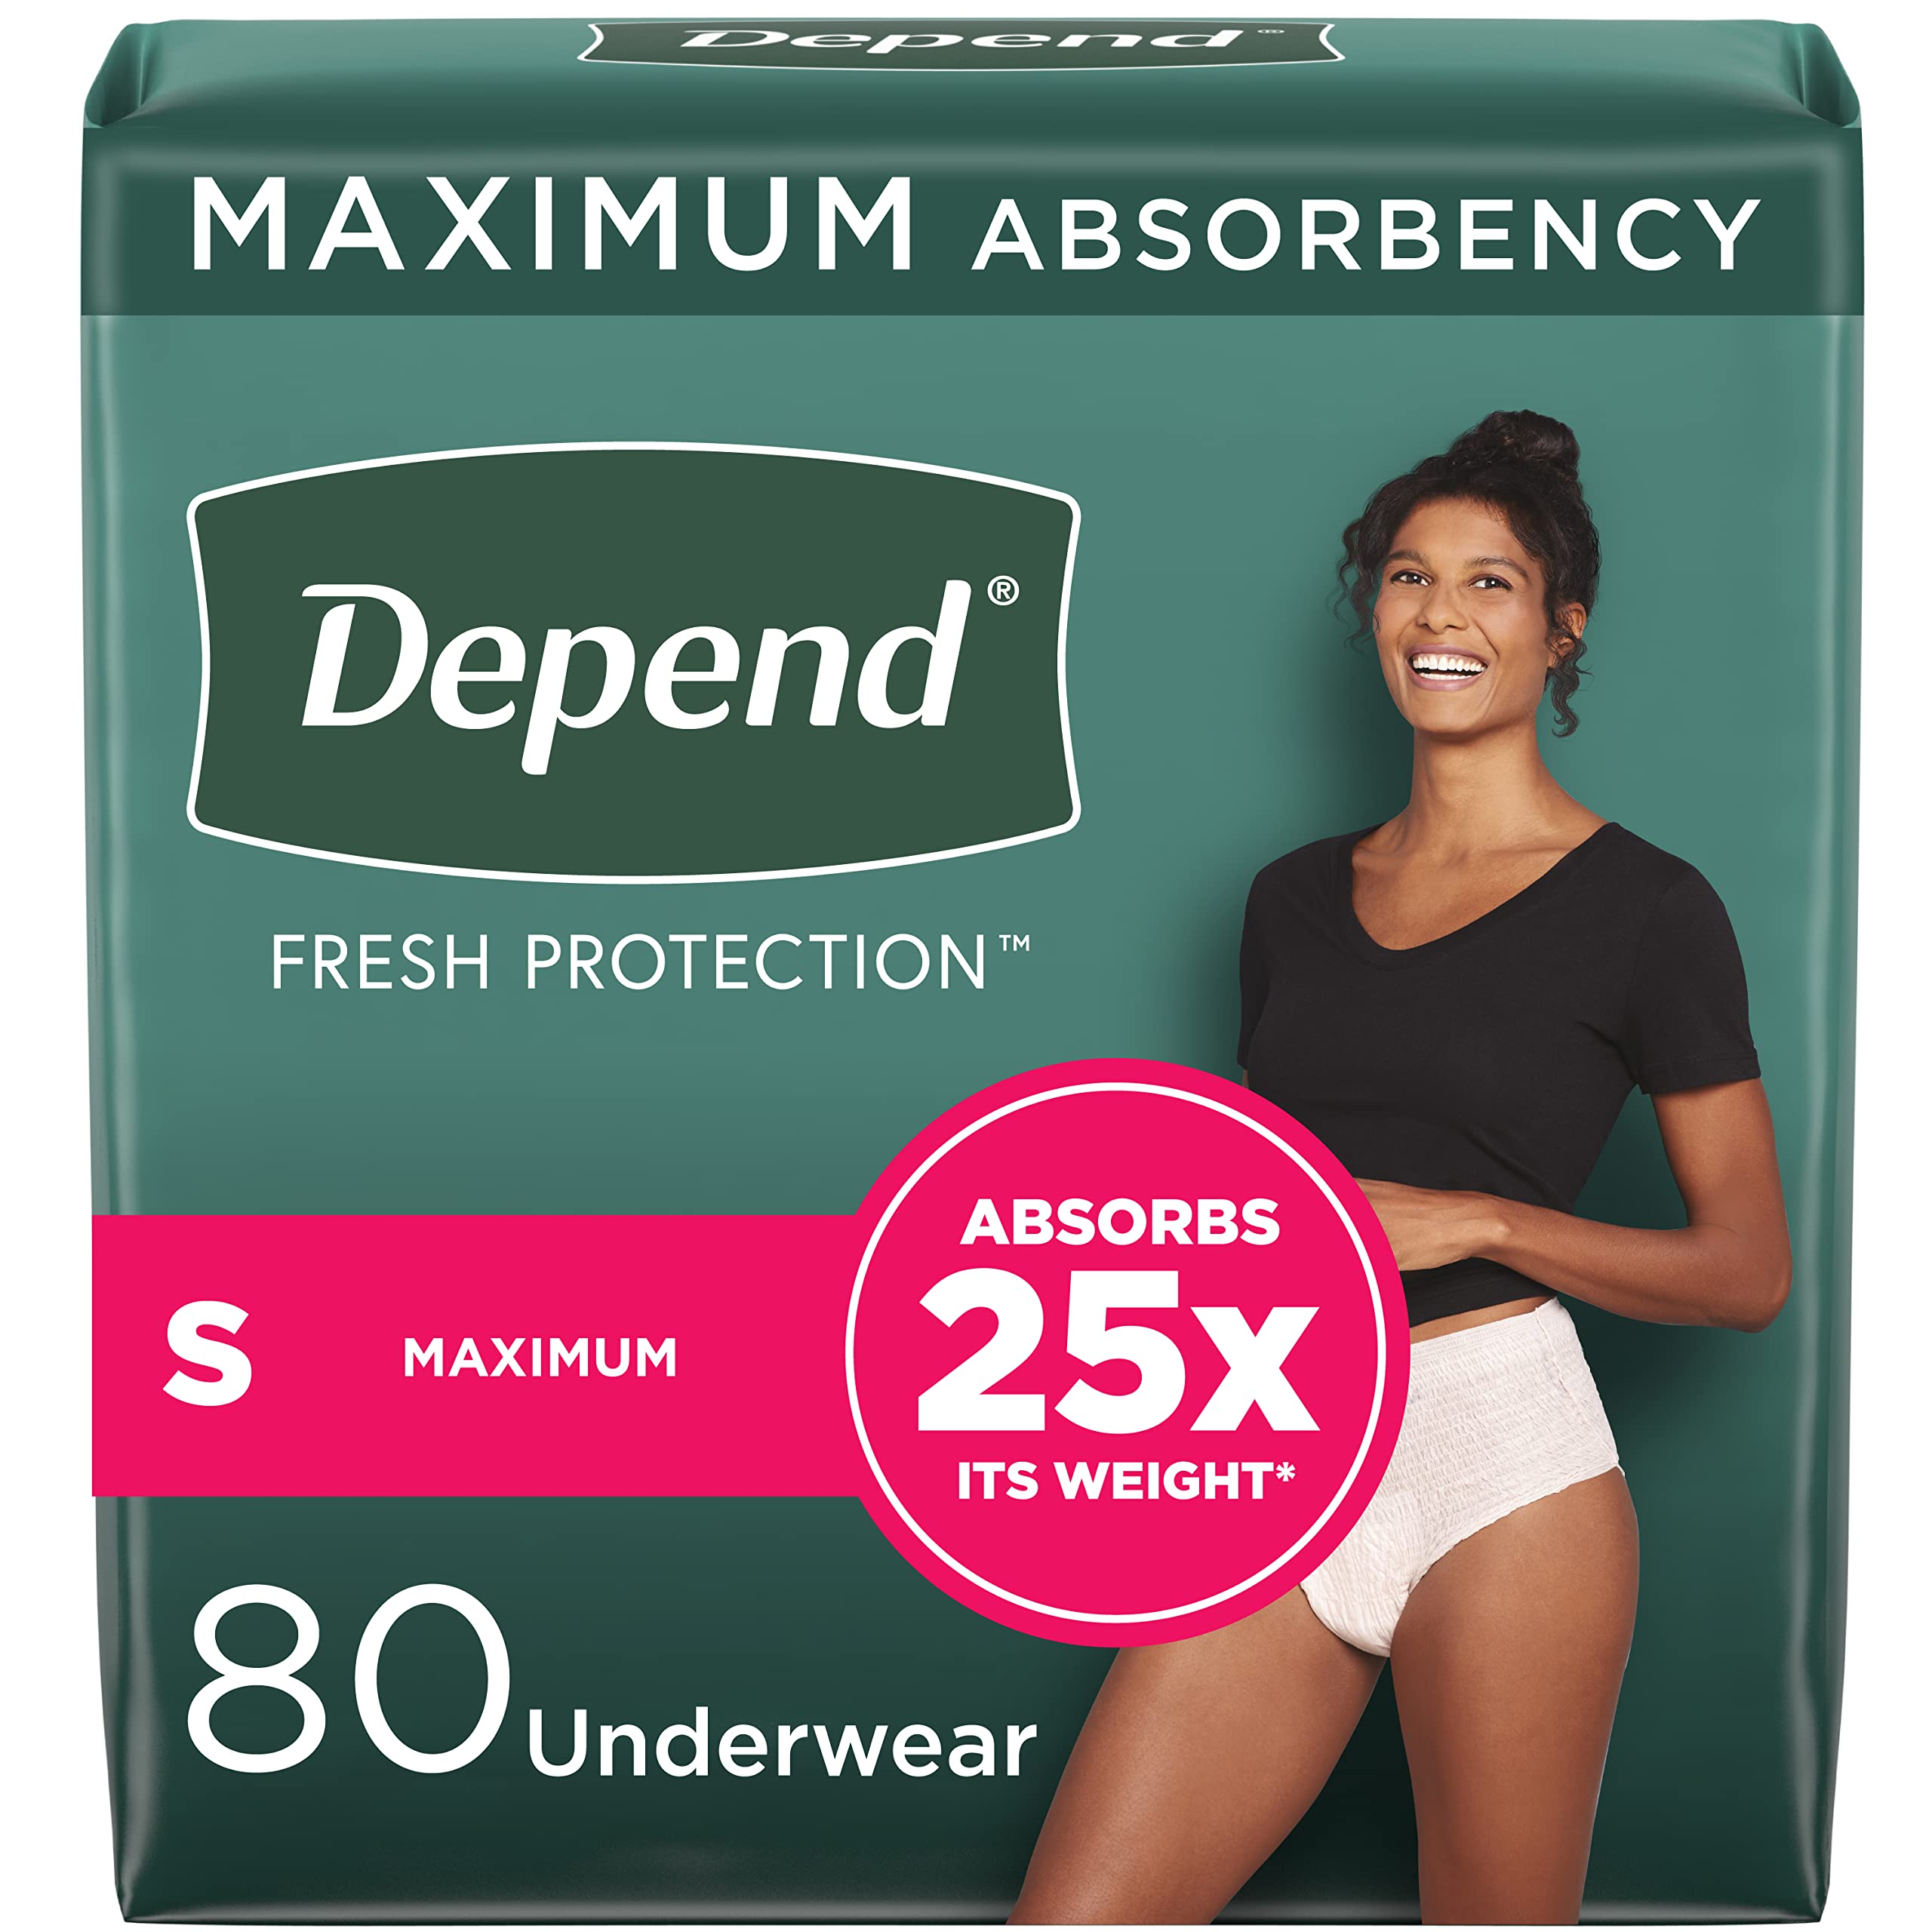 Depend Fresh Protection Adult Incontinence Underwear for Women (Formerly Depend Fit-Flex), Disposable, Maximum, Small, Blush, 80 Count, Packaging May Vary